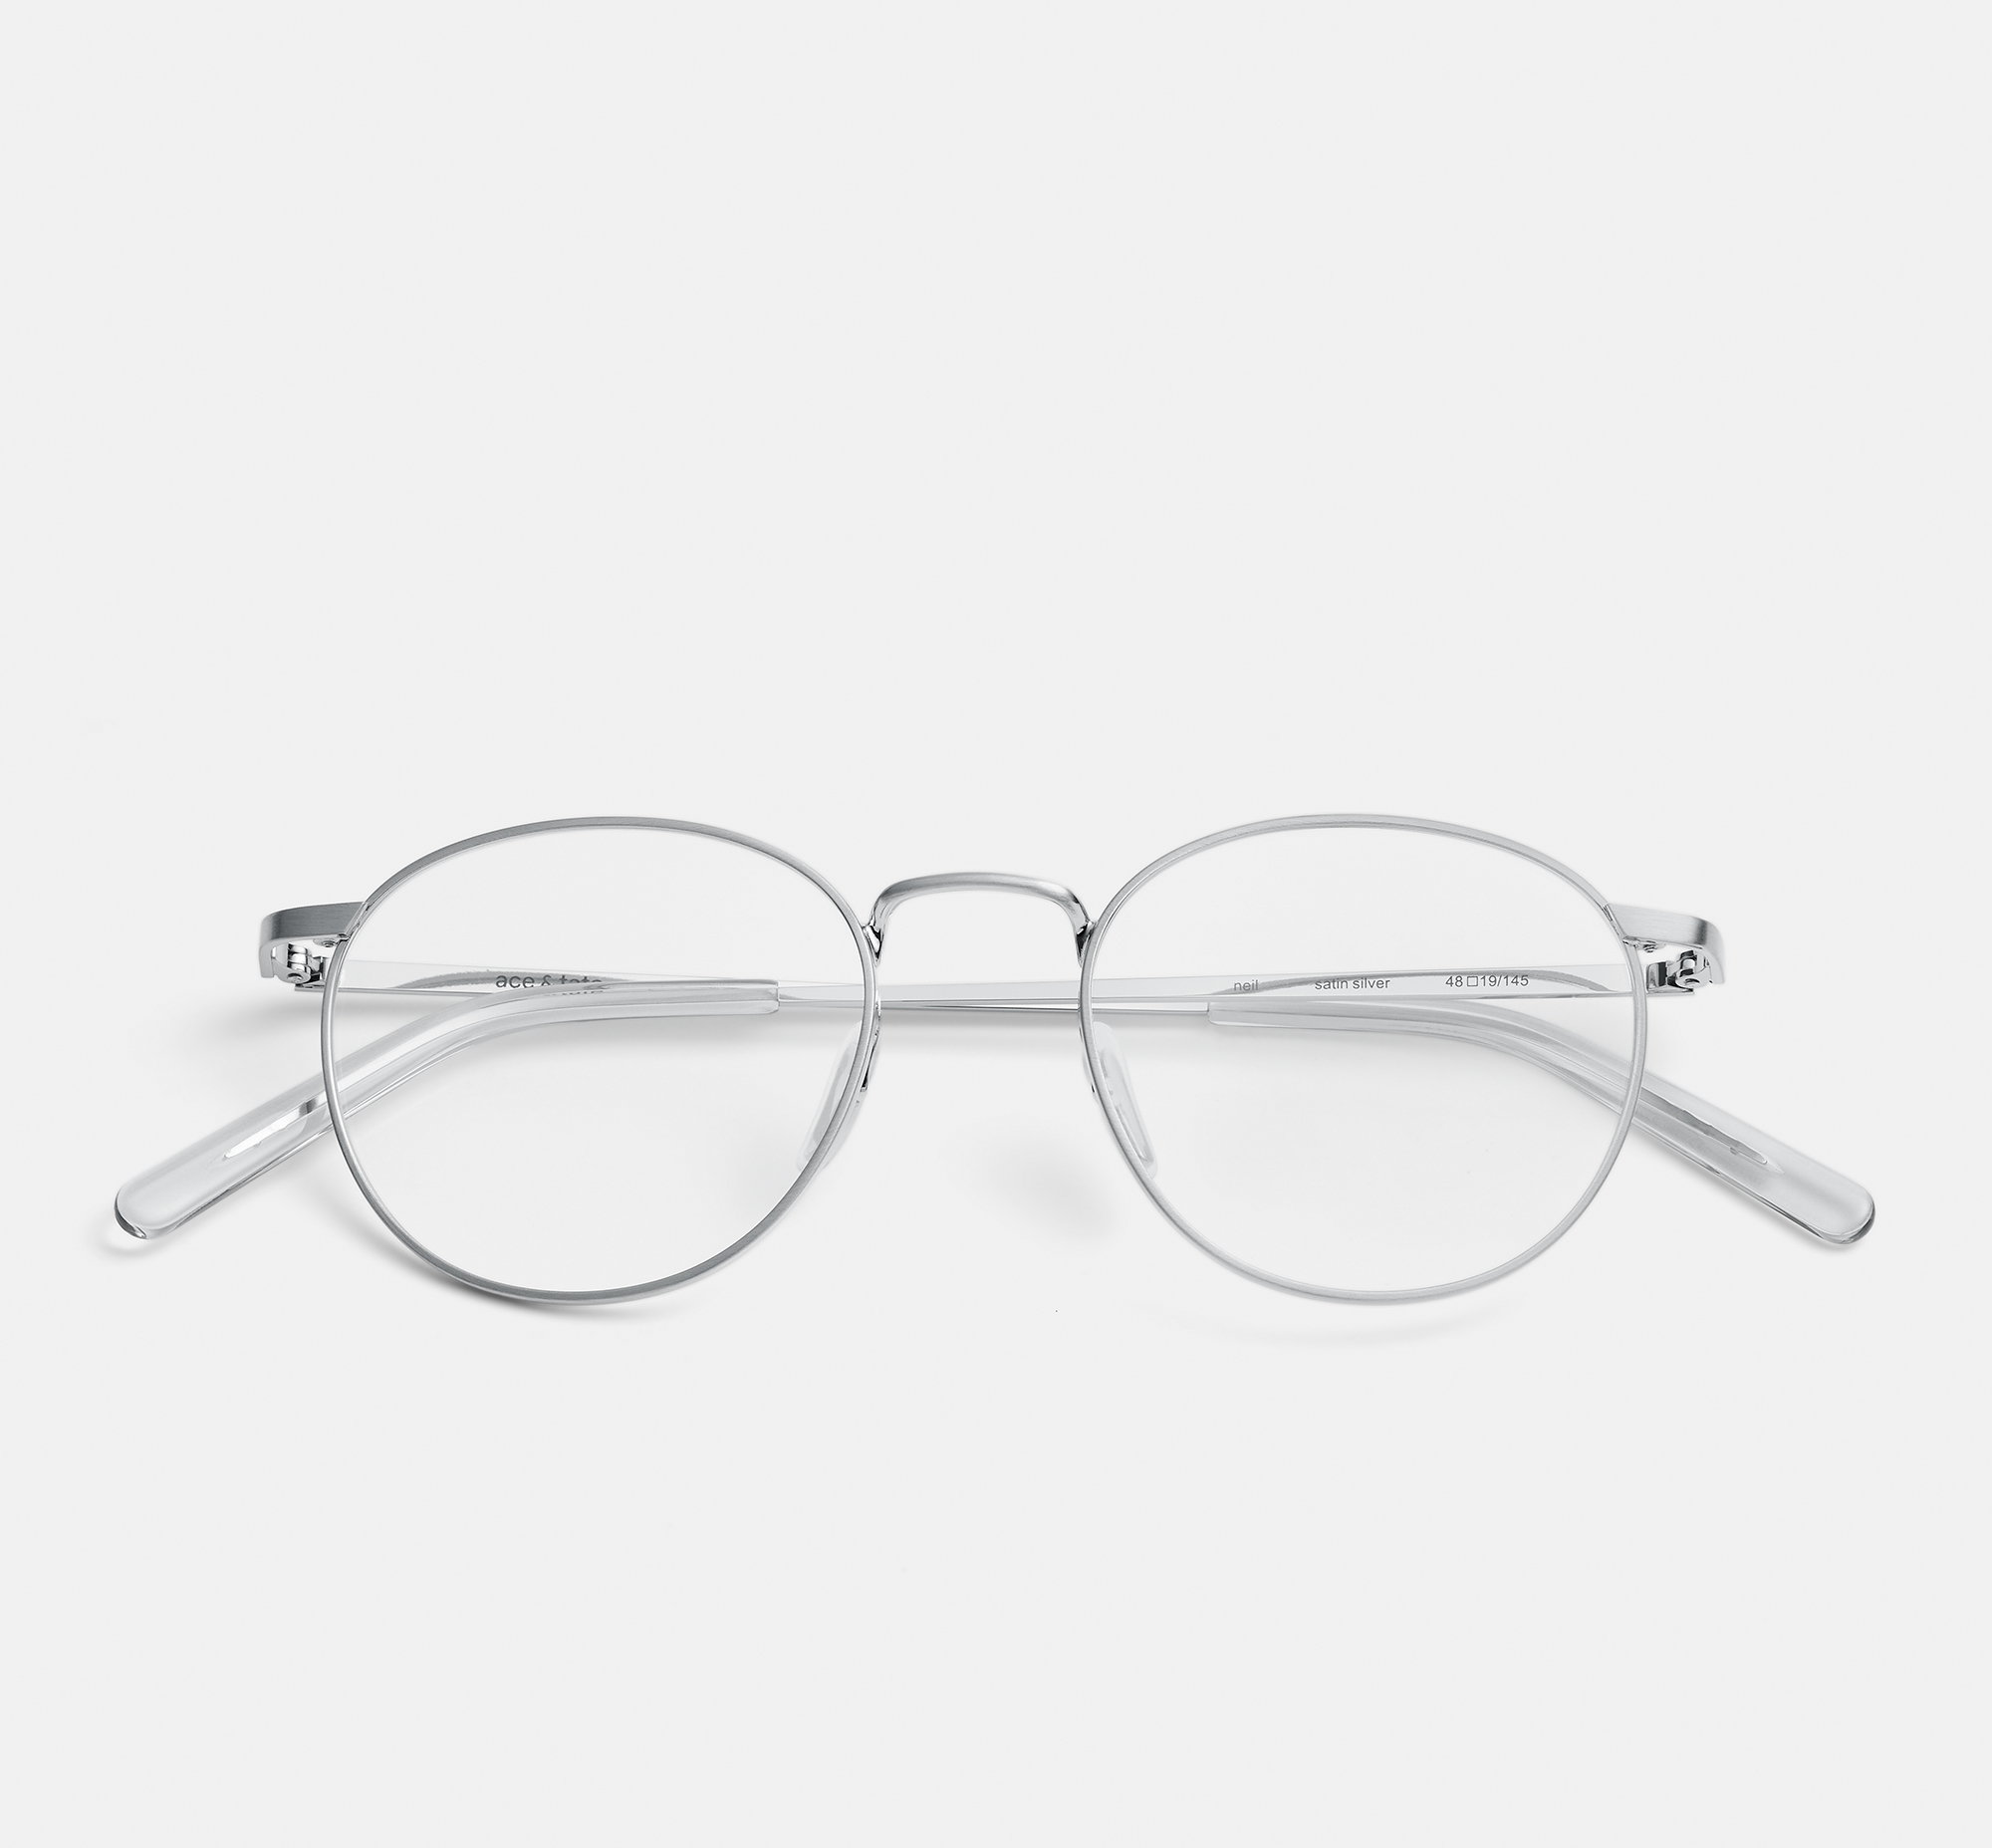 Neil Satin Silver | Round Metal Glasses | Ace & Tate